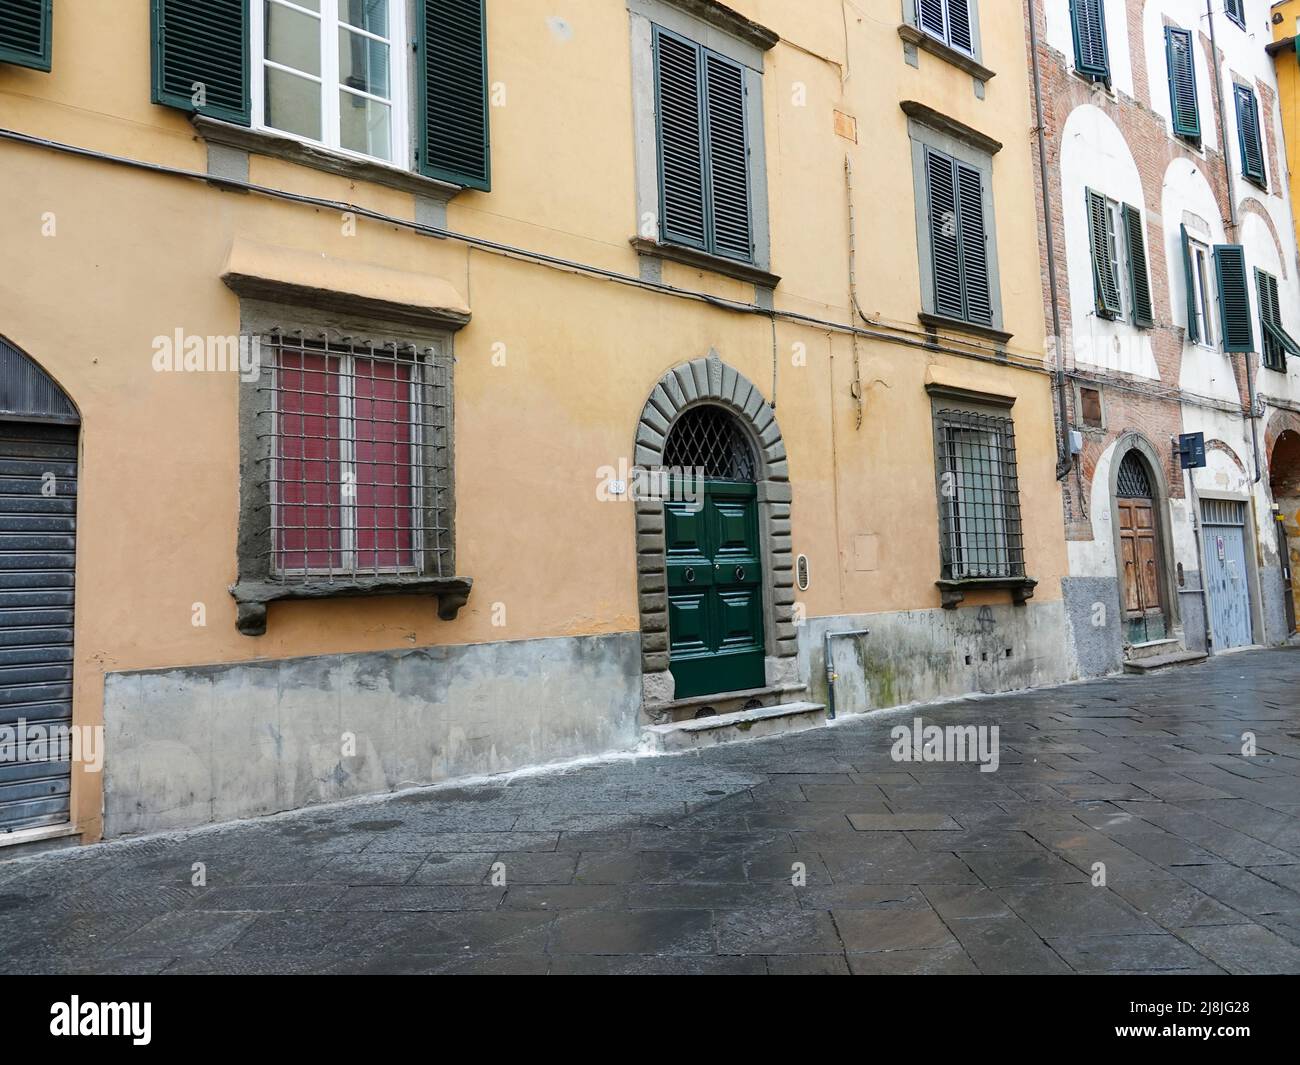 Apartment buildings on Via Antonio Mordini in the walled city of Lucca, Italy. Stock Photo